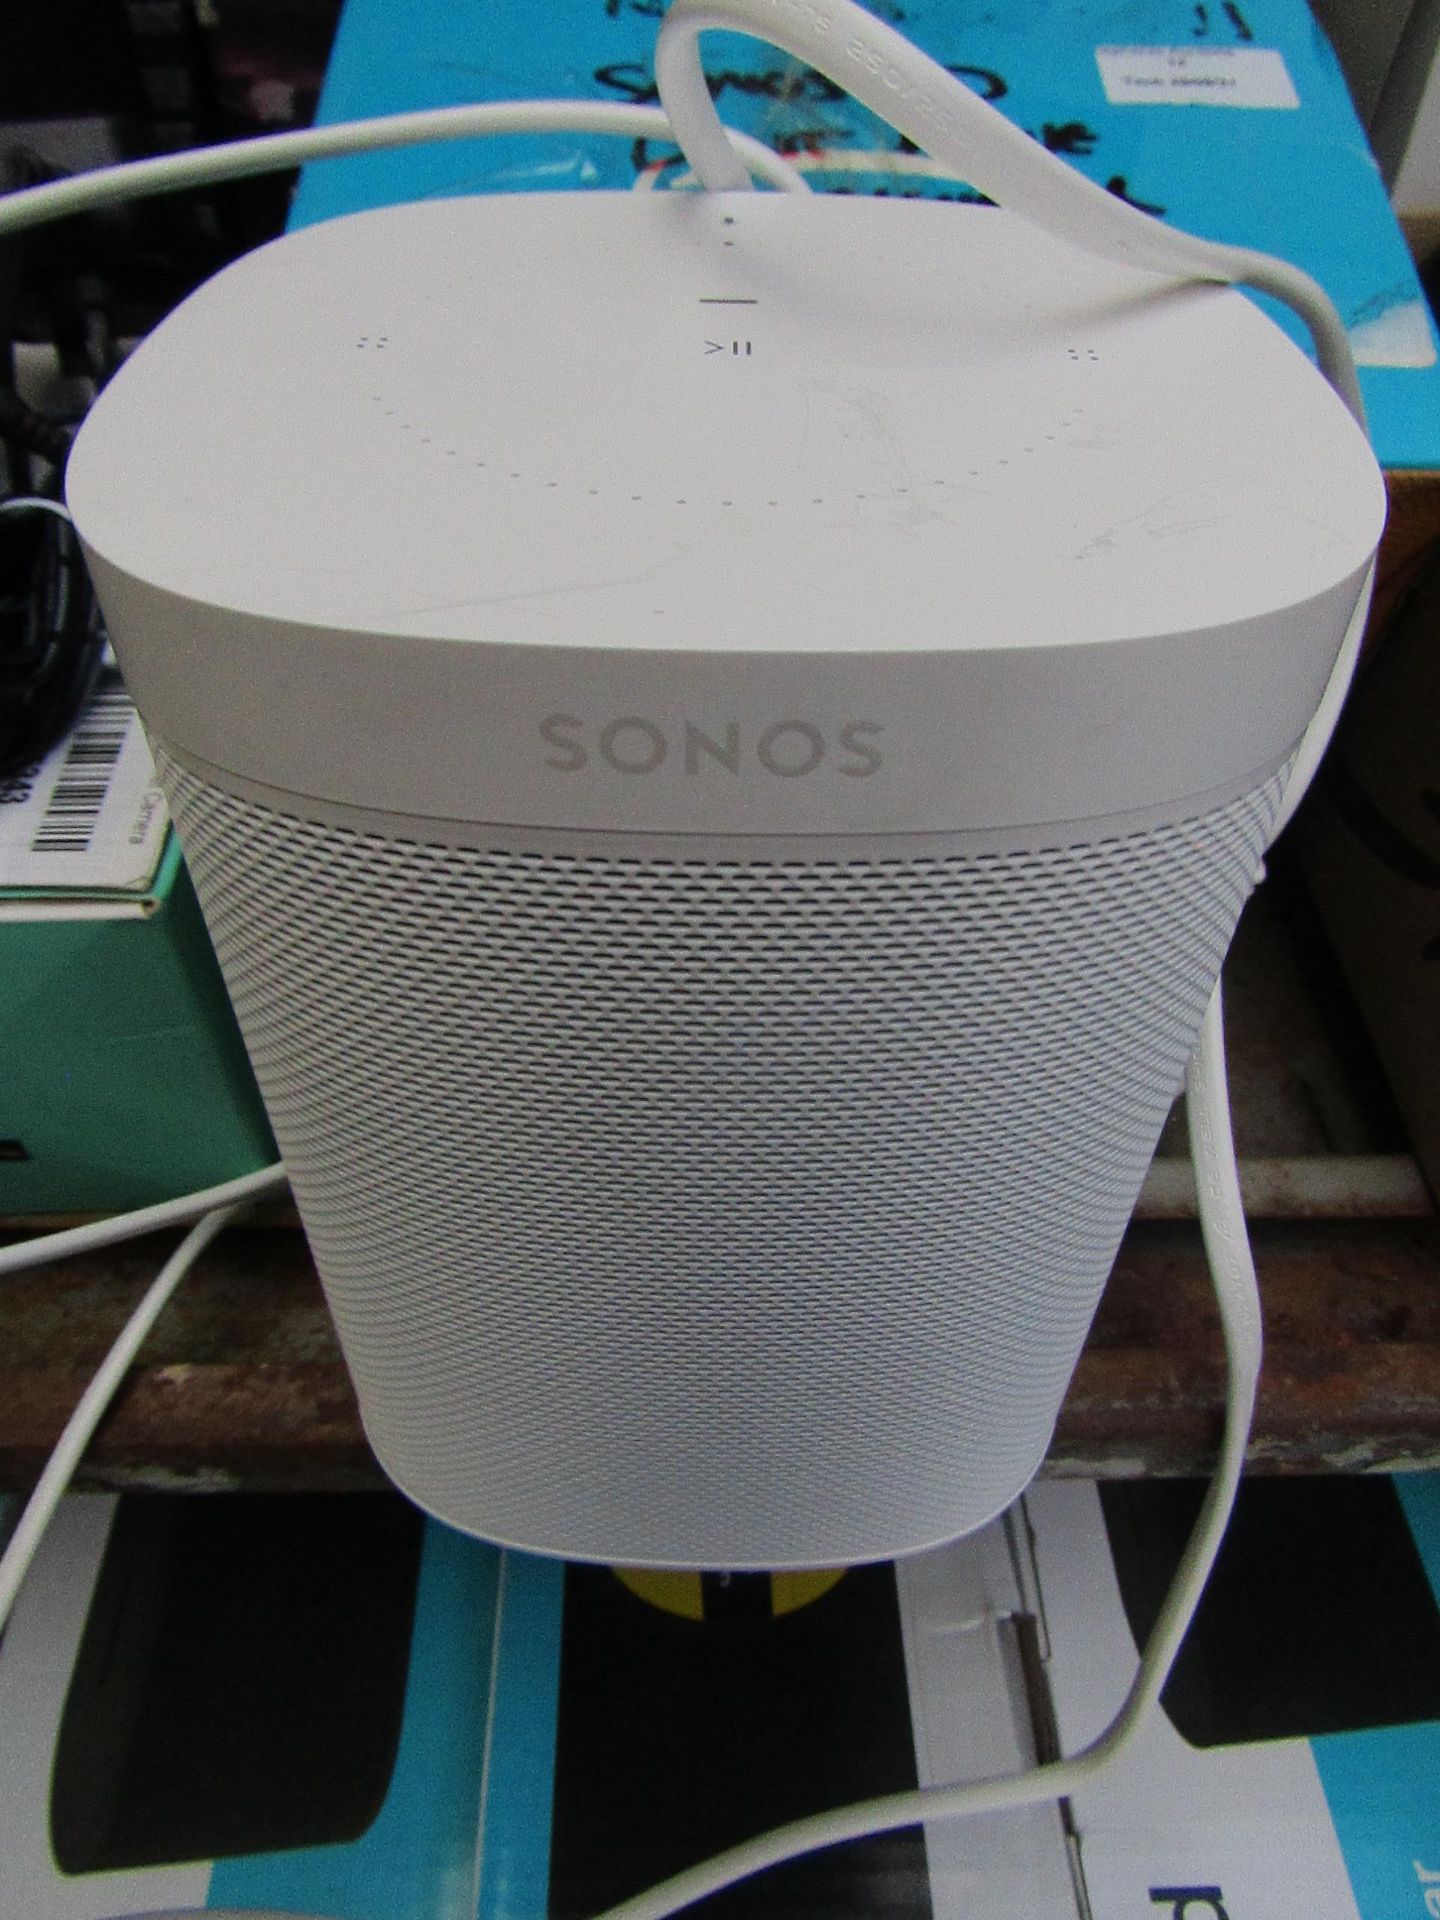 Sonos one gen2 speaker, powers on but havent connected to a network due to the length of time and